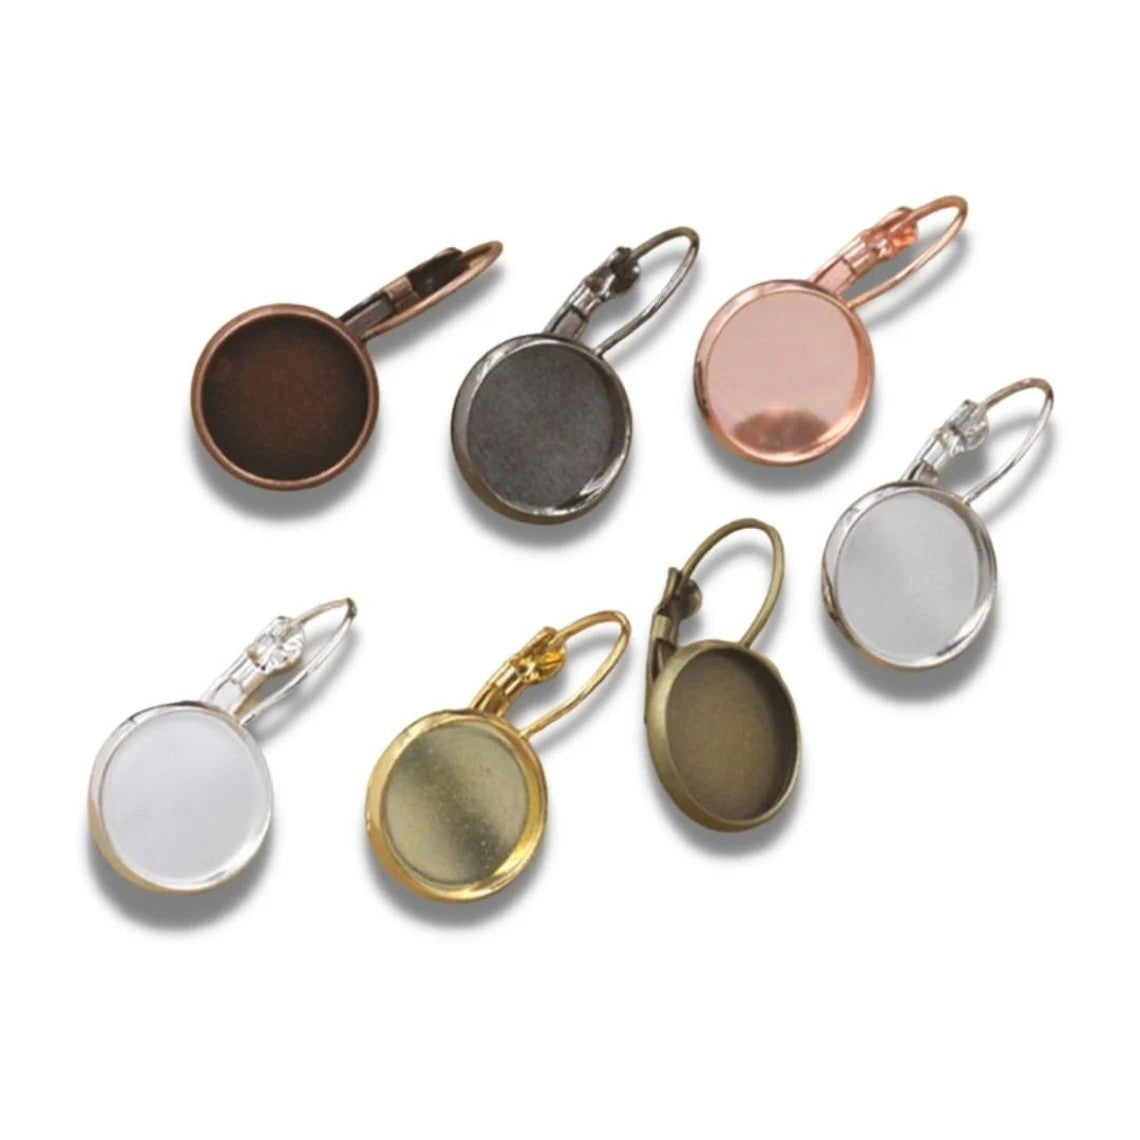 Brass lever back cabochon settings earring hooks - Nickel free, lead free and cadmium free